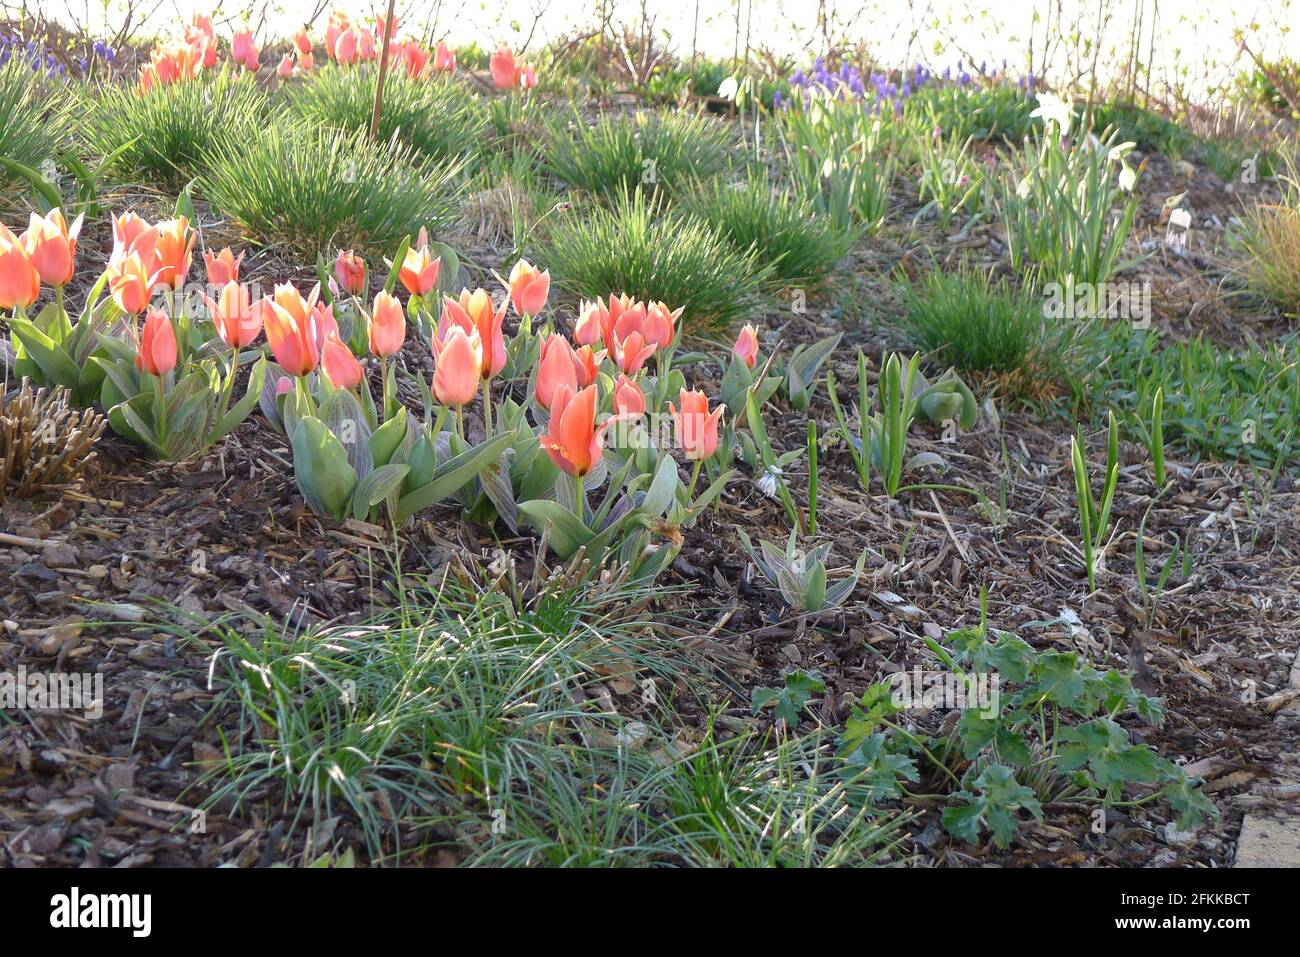 Orange-red Greigii tulips (tulipa) Calypso with striped leaves bloom in a garden in April Stock Photo